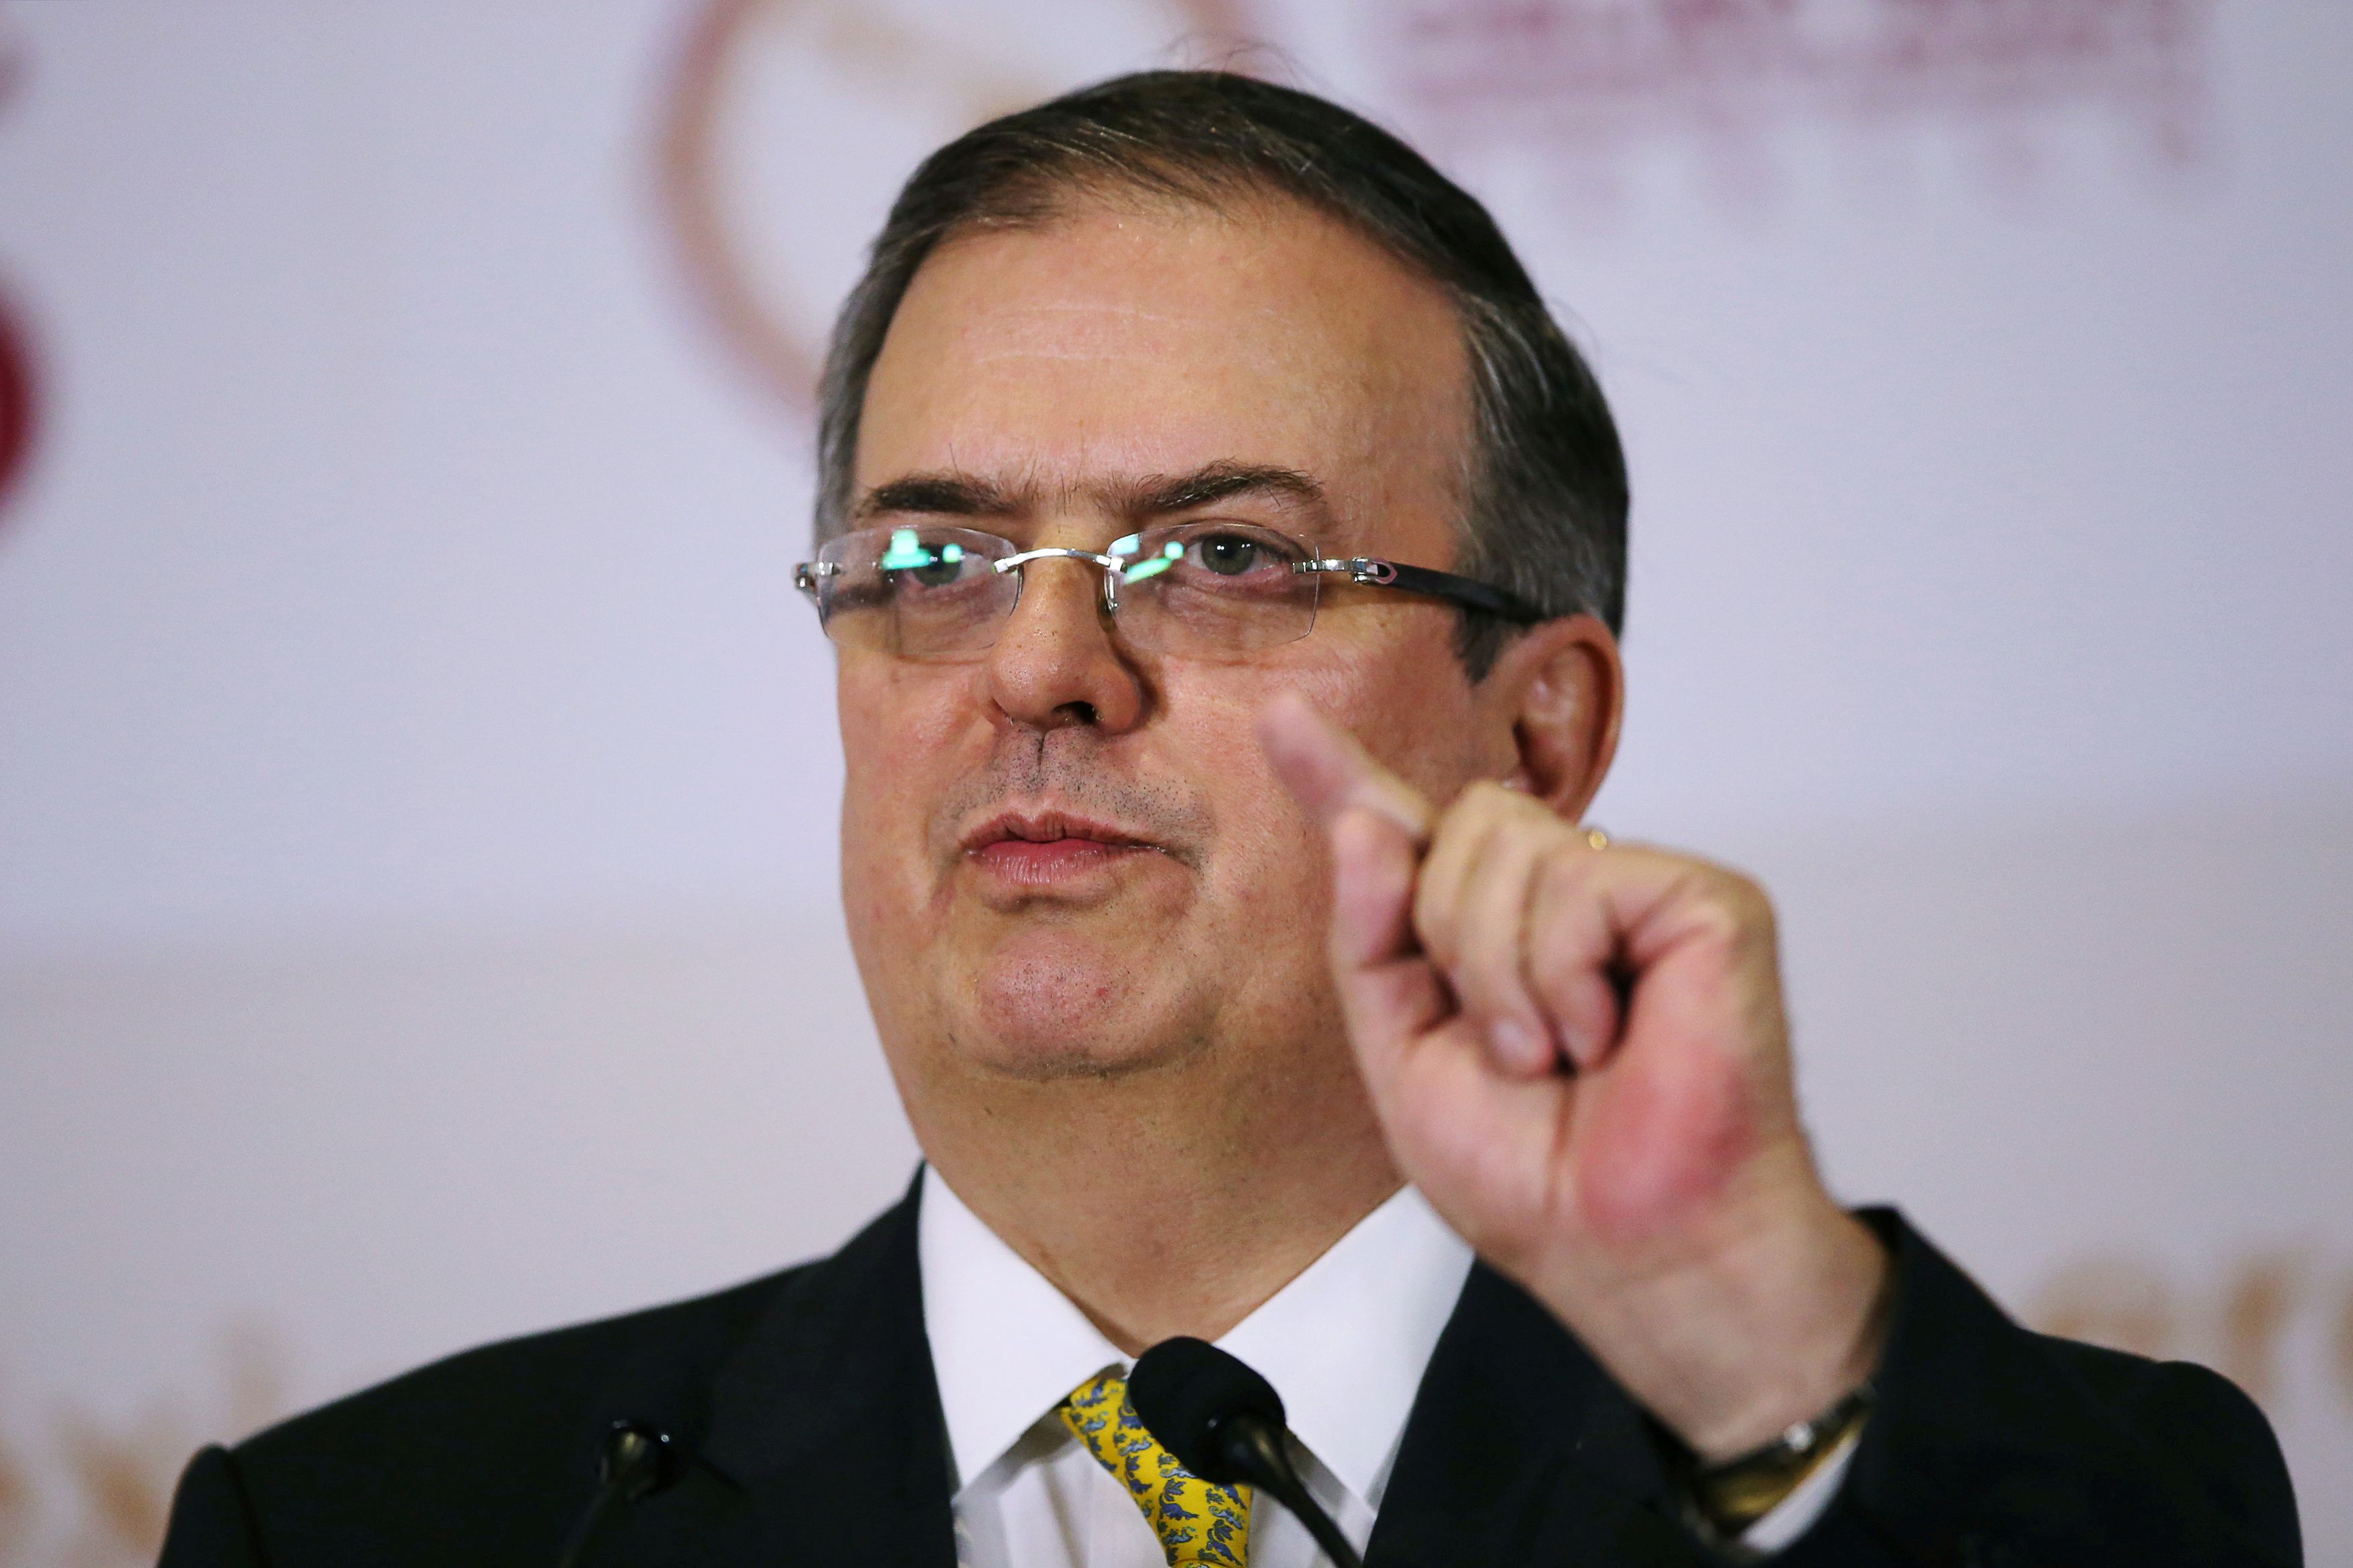 FILE PHOTO: Mexico's Foreign Minister Marcelo Ebrard delivers a message to the media after taking on the Pro Tempore Presidency (PTP) of the Community of Latin American and Caribbean States (CELAC), in Mexico City, Mexico, January 8, 2020. REUTERS/Edgard Garrido/File Photo